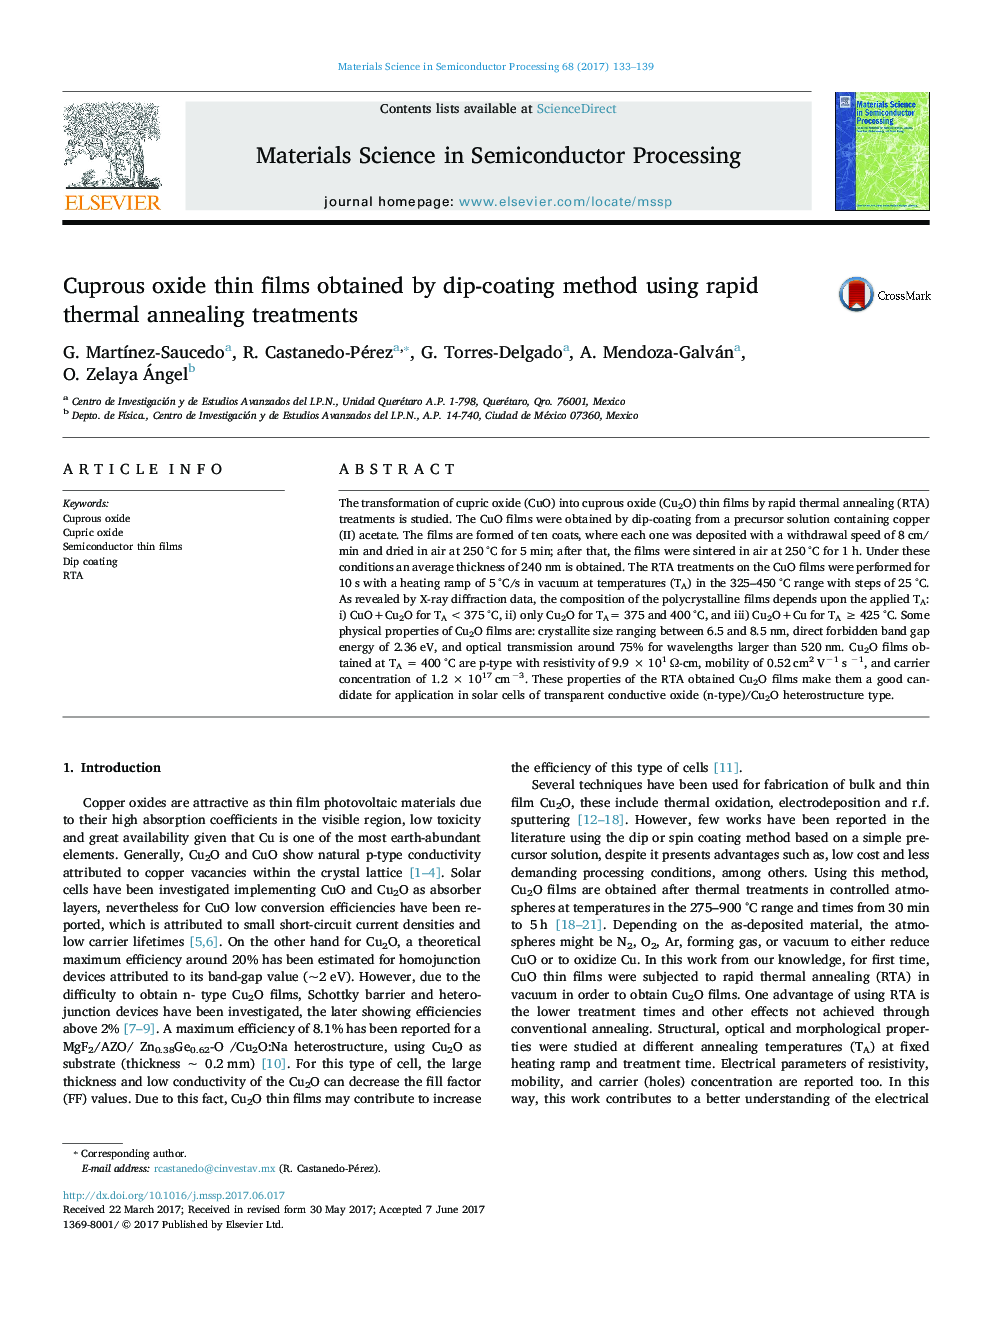 Cuprous oxide thin films obtained by dip-coating method using rapid thermal annealing treatments